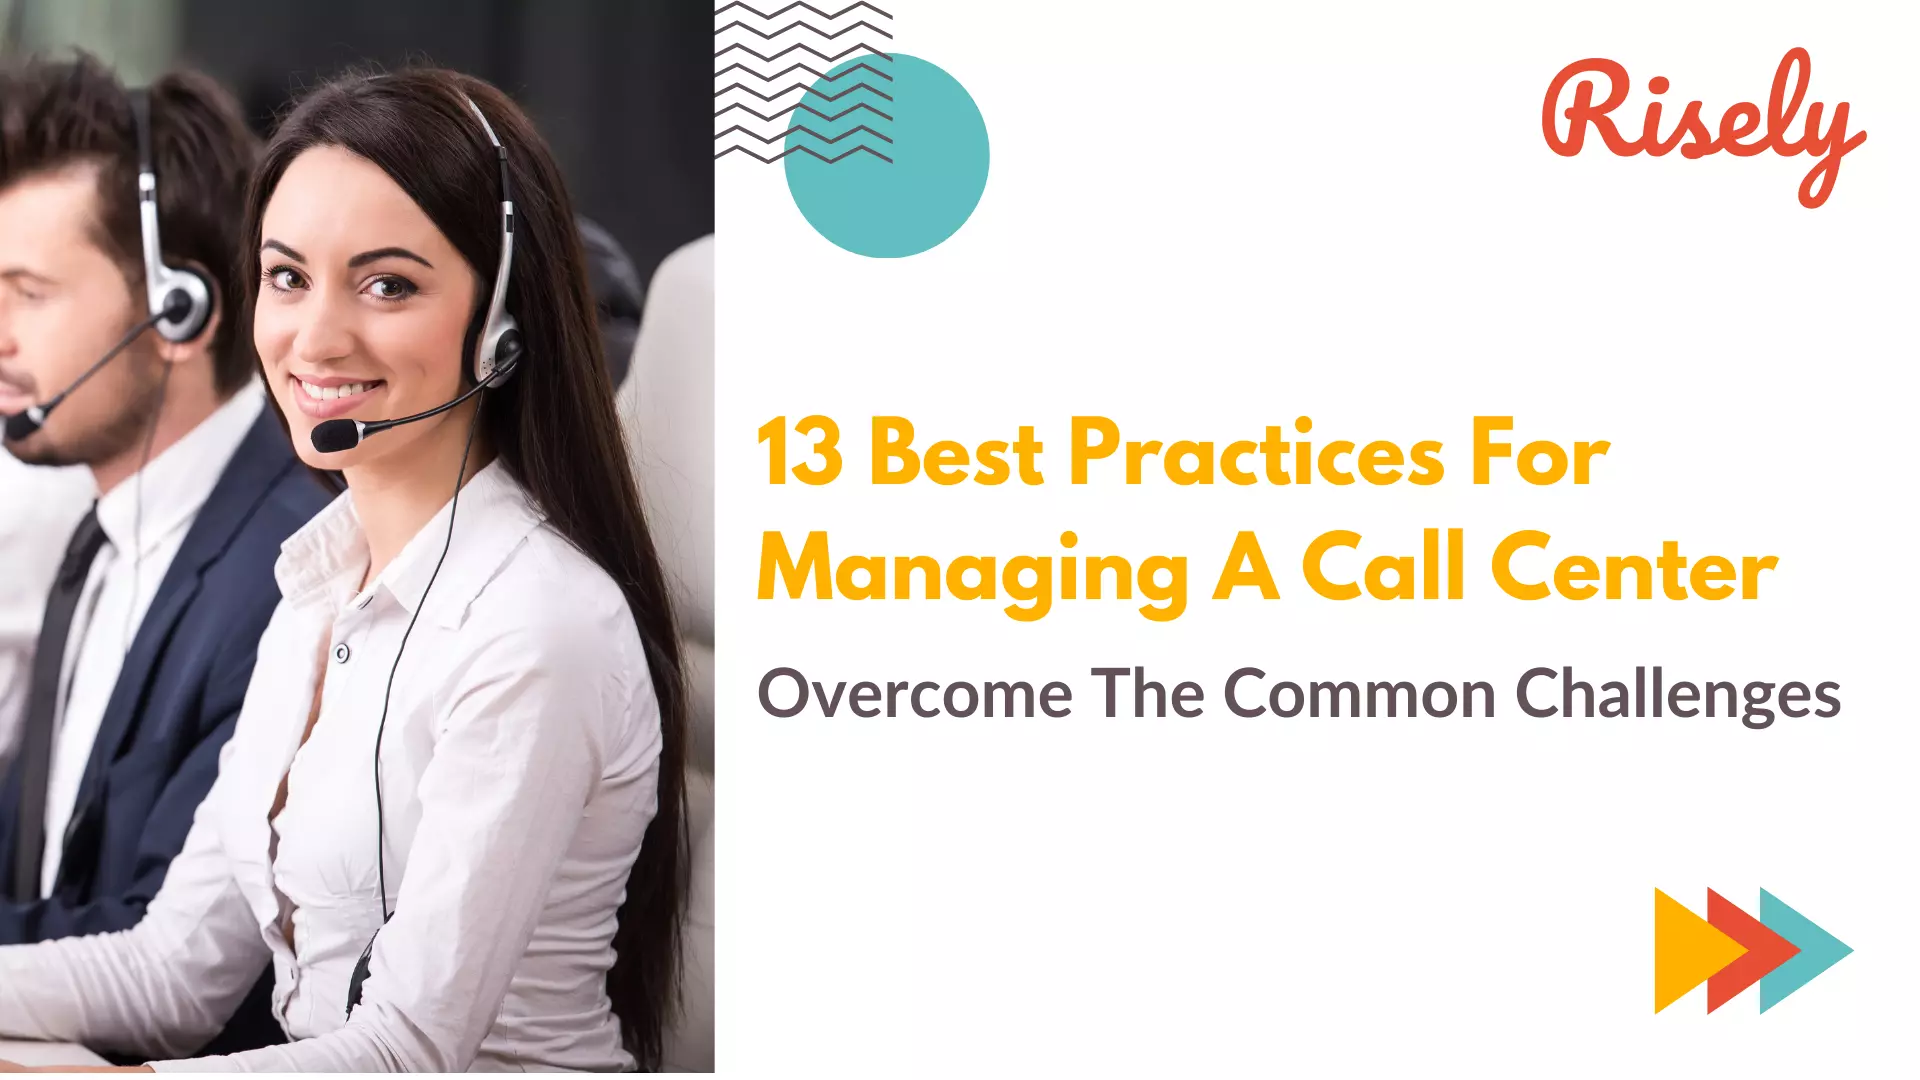 Challenges in managing a call center